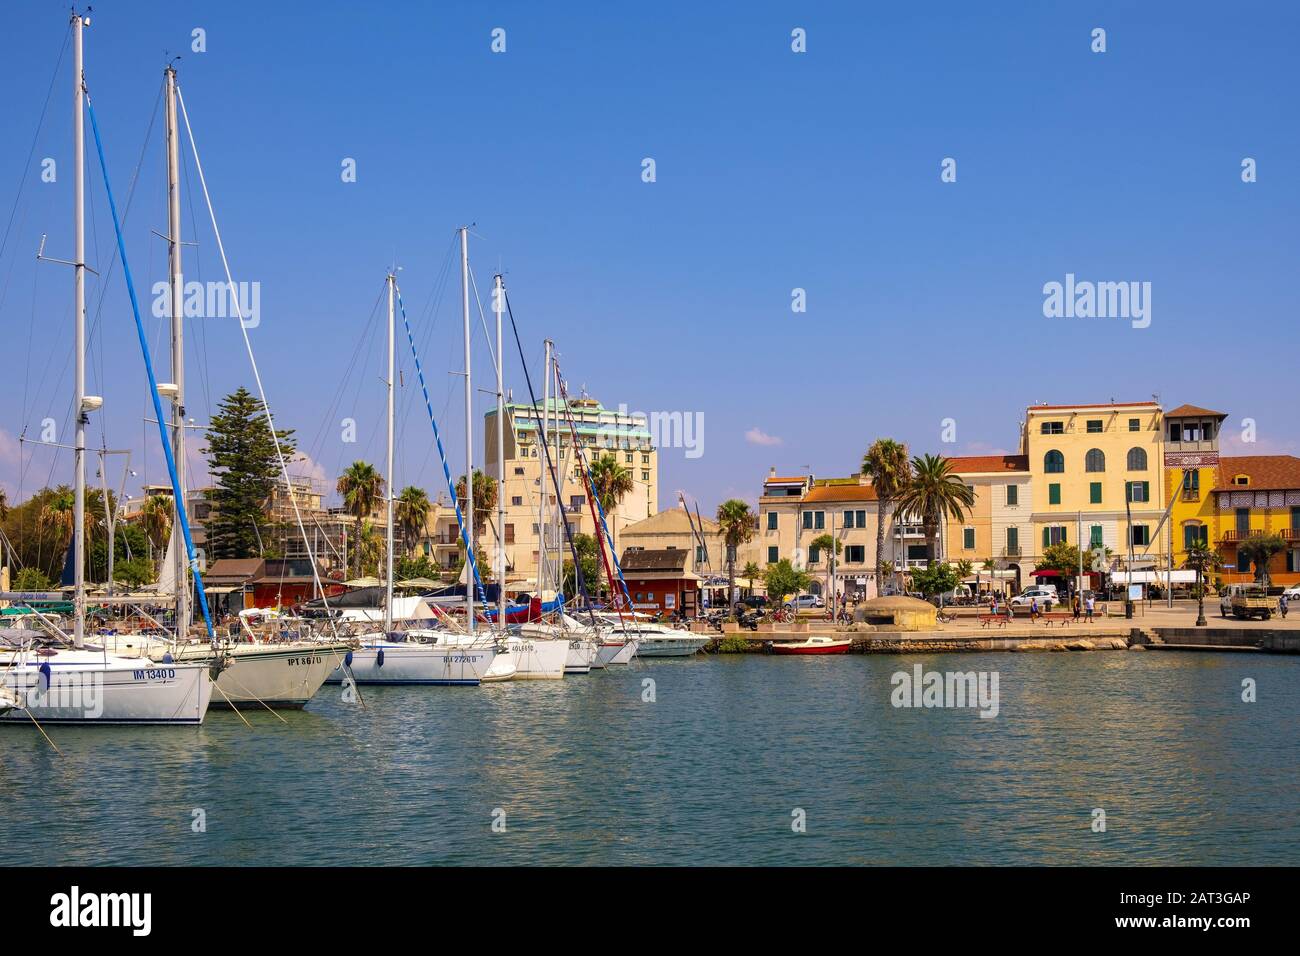 Alghero, Sardinia / Italy - 2018/08/10: Summer view of the Alghero Marina yacht port at the Gulf of Alghero at Mediterranean Sea with the Old Town quarter with historic defense walls Stock Photo